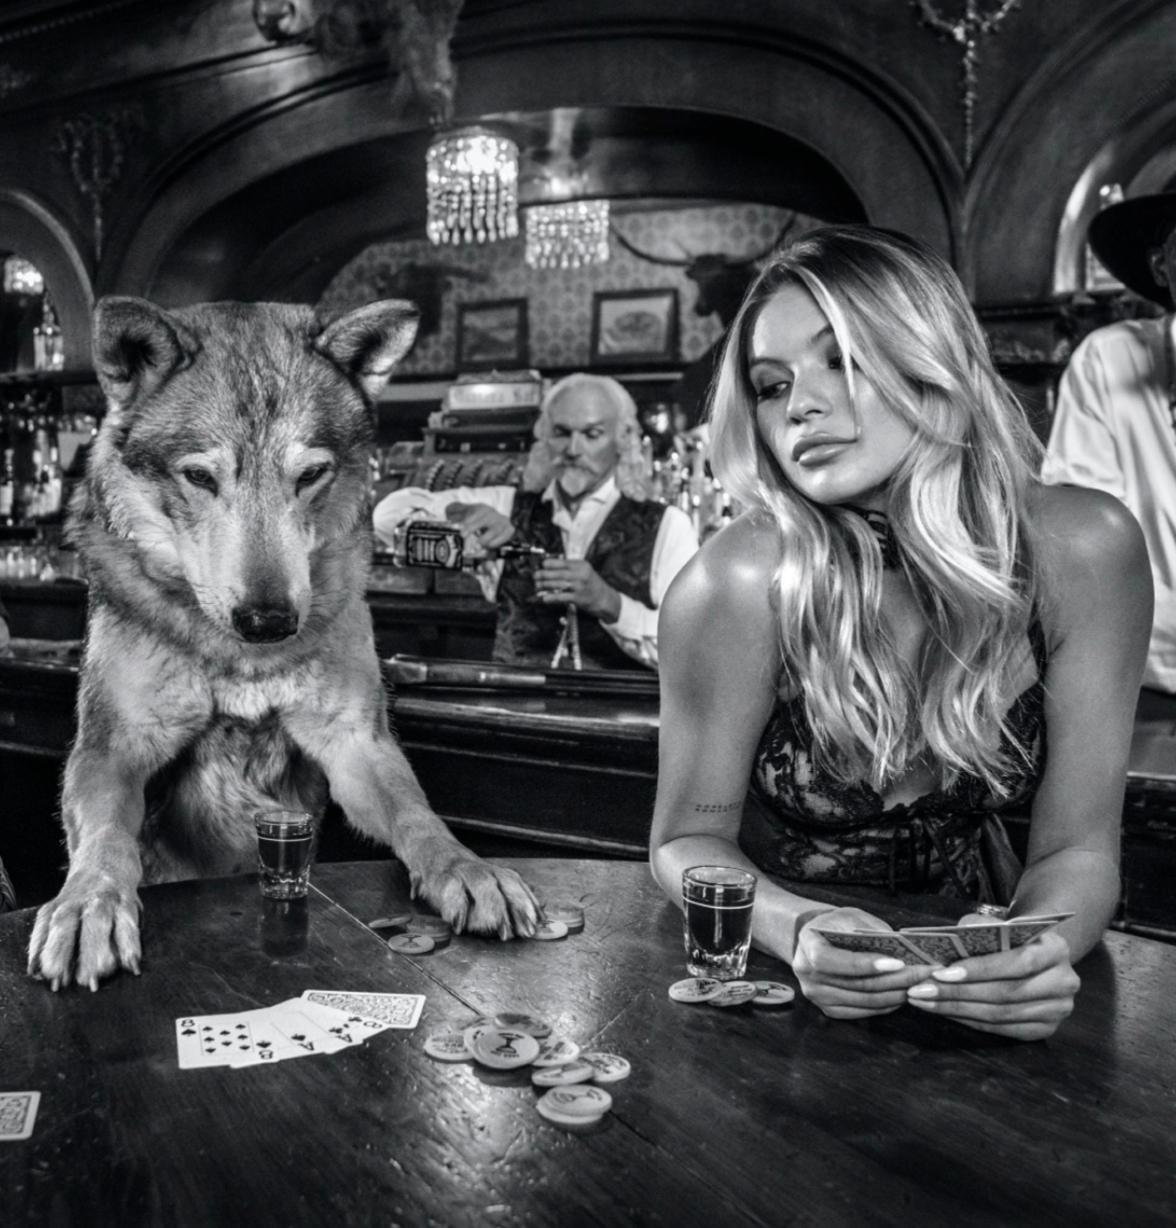 Aces and Eights / Sexy Framed Western Photo Josie Canseco in Montana Salloon - Contemporary Photograph by David Yarrow